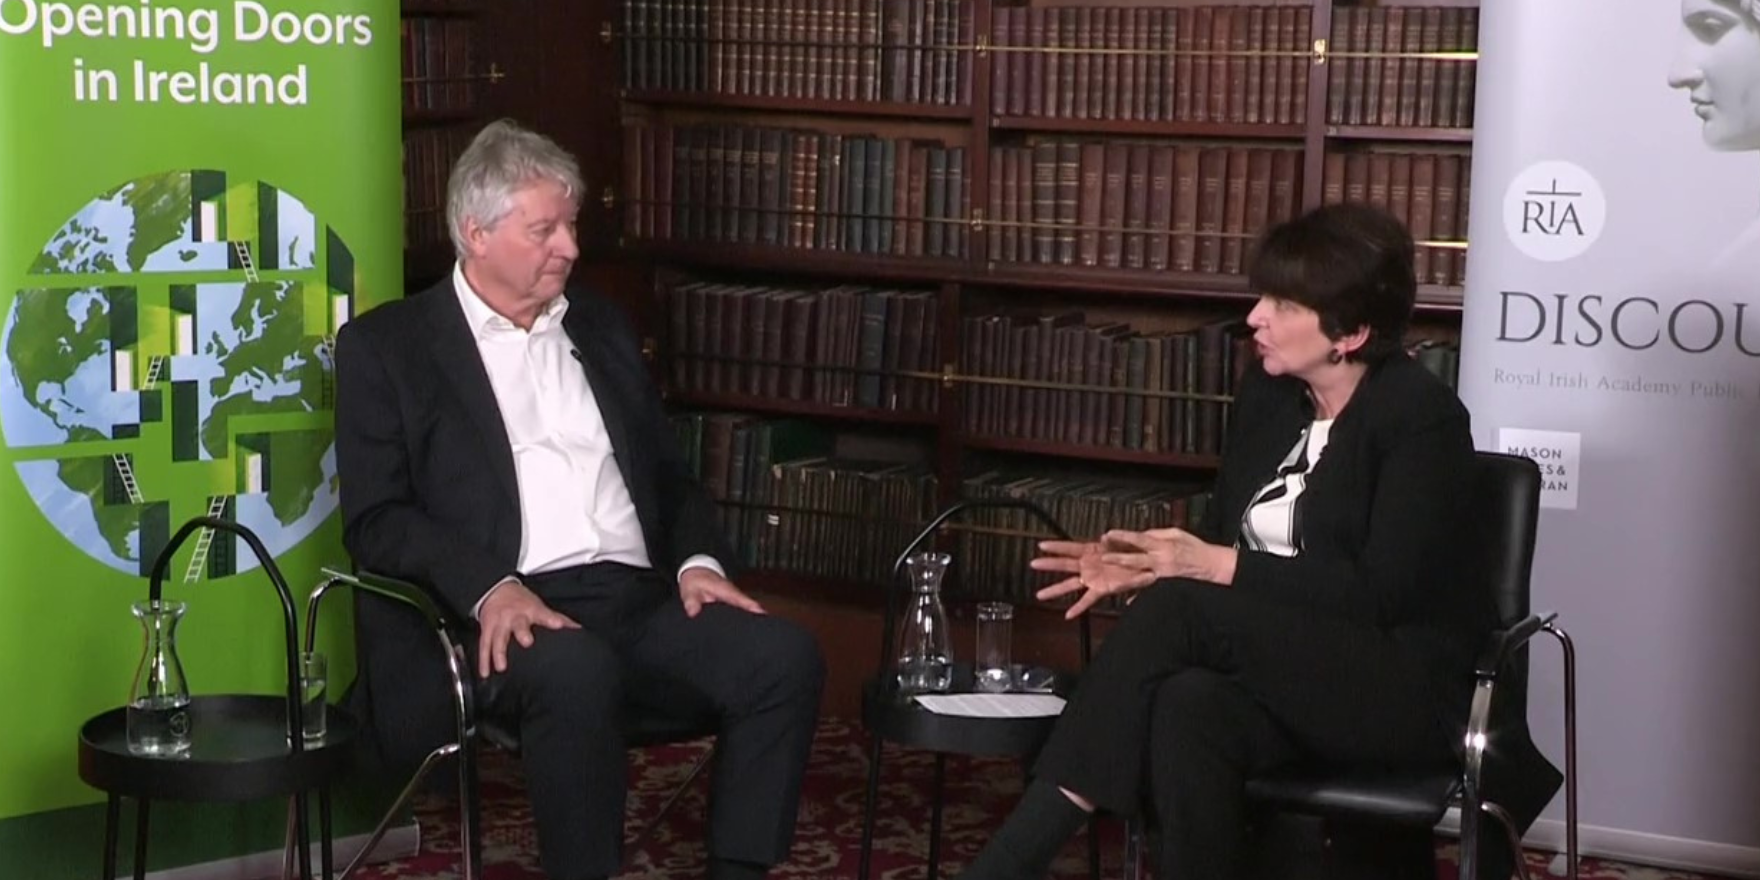 A man with grey short hair (left) and a woman with dark short hair (right) sit facing each other in office chairs, they are in conversation. Both are wearing suits. A bookcase lined with leather bound books is behind them, two pull up banners stand on either side of the chairs.